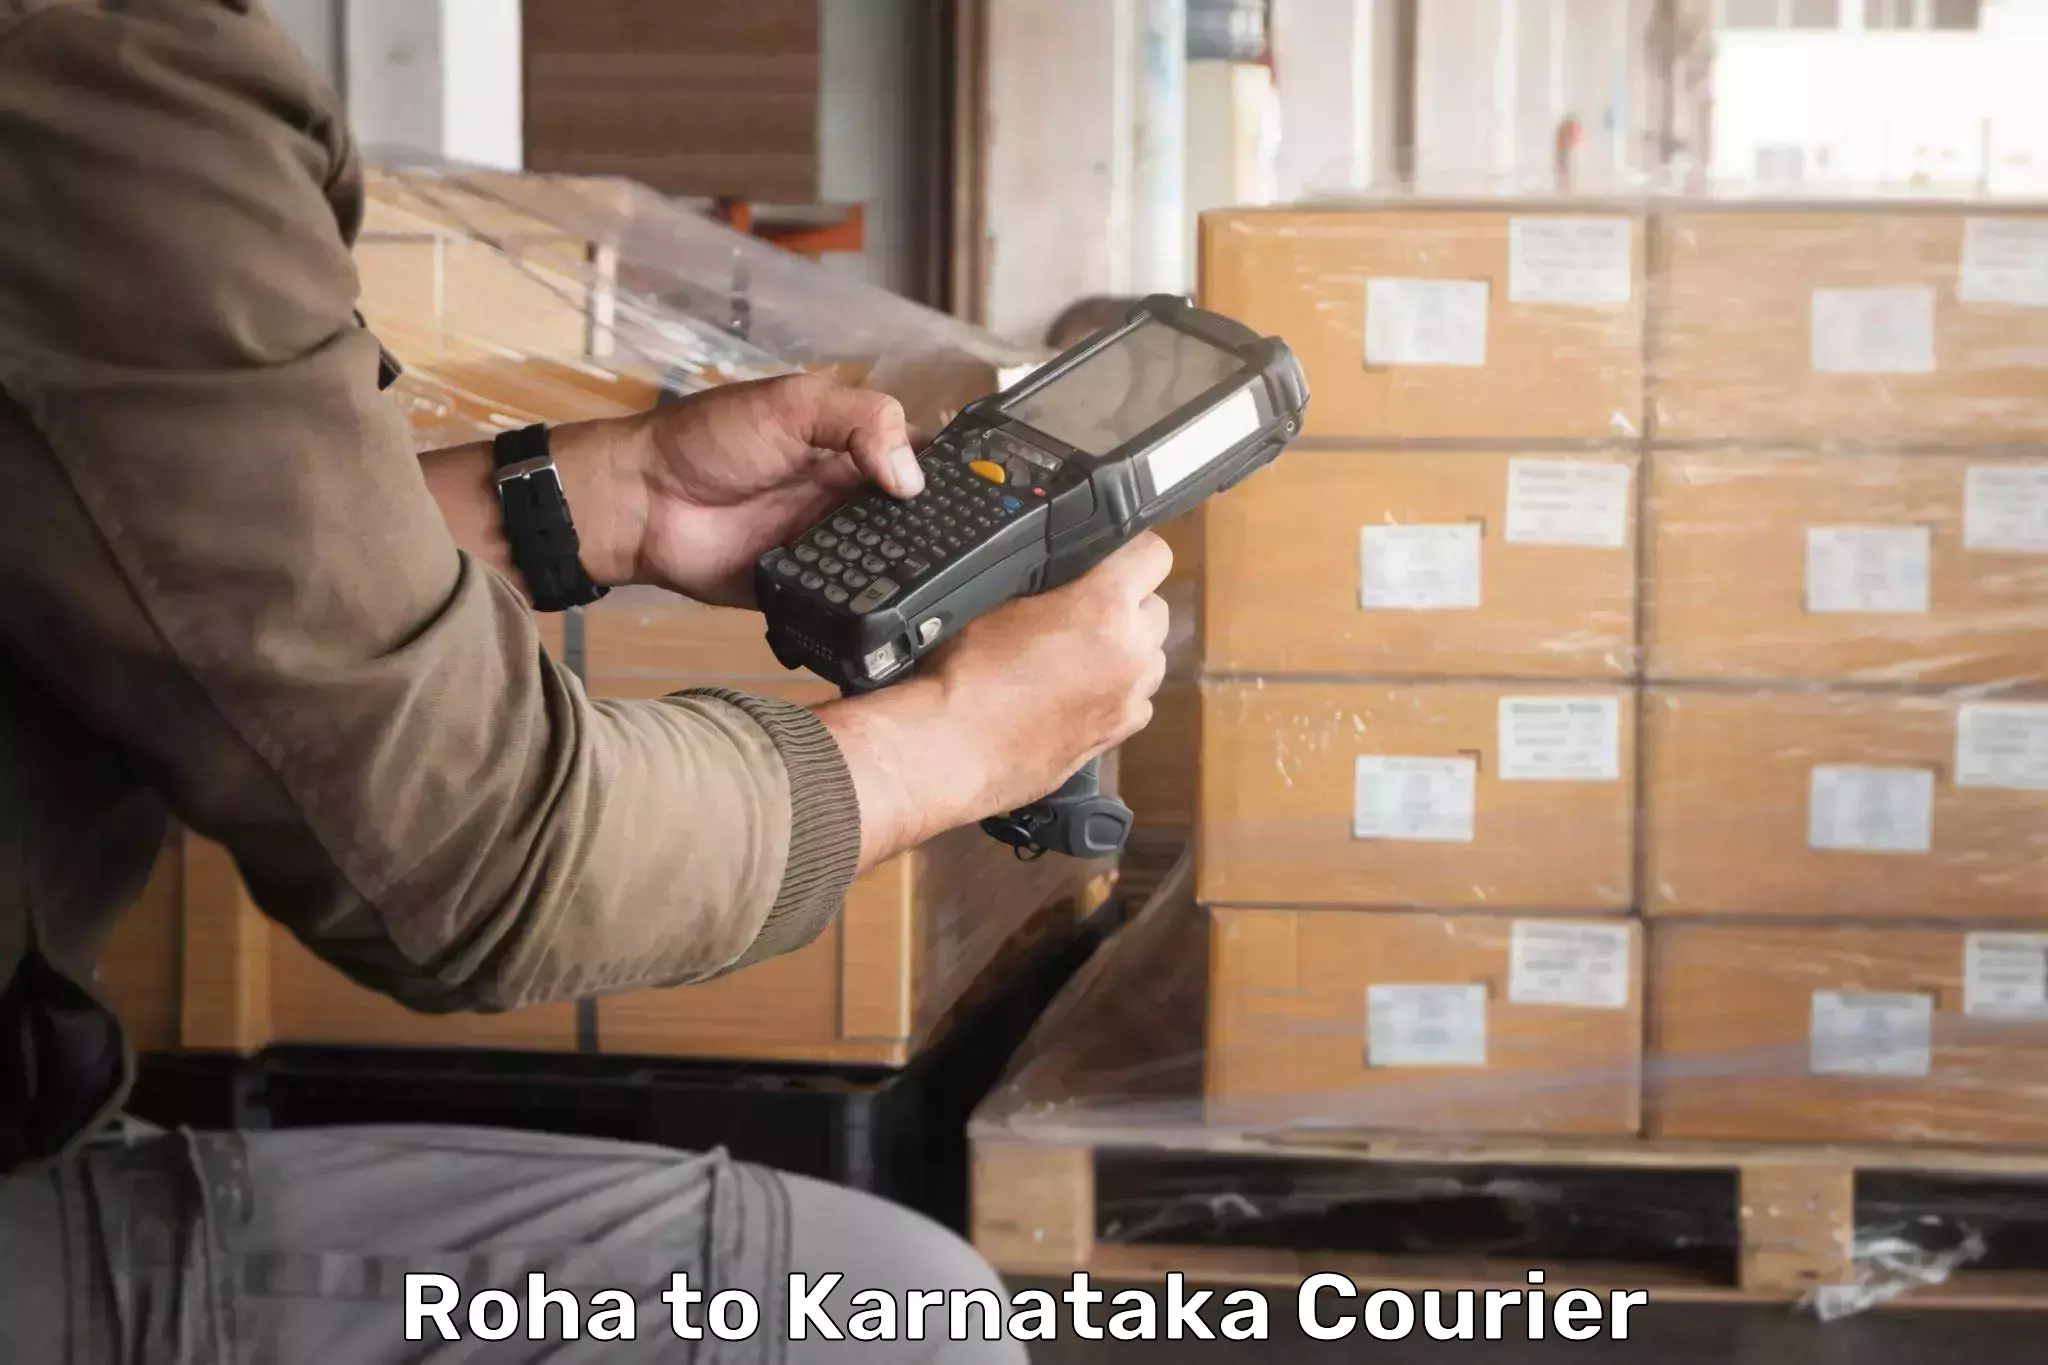 24-hour courier services Roha to Mangalore Port